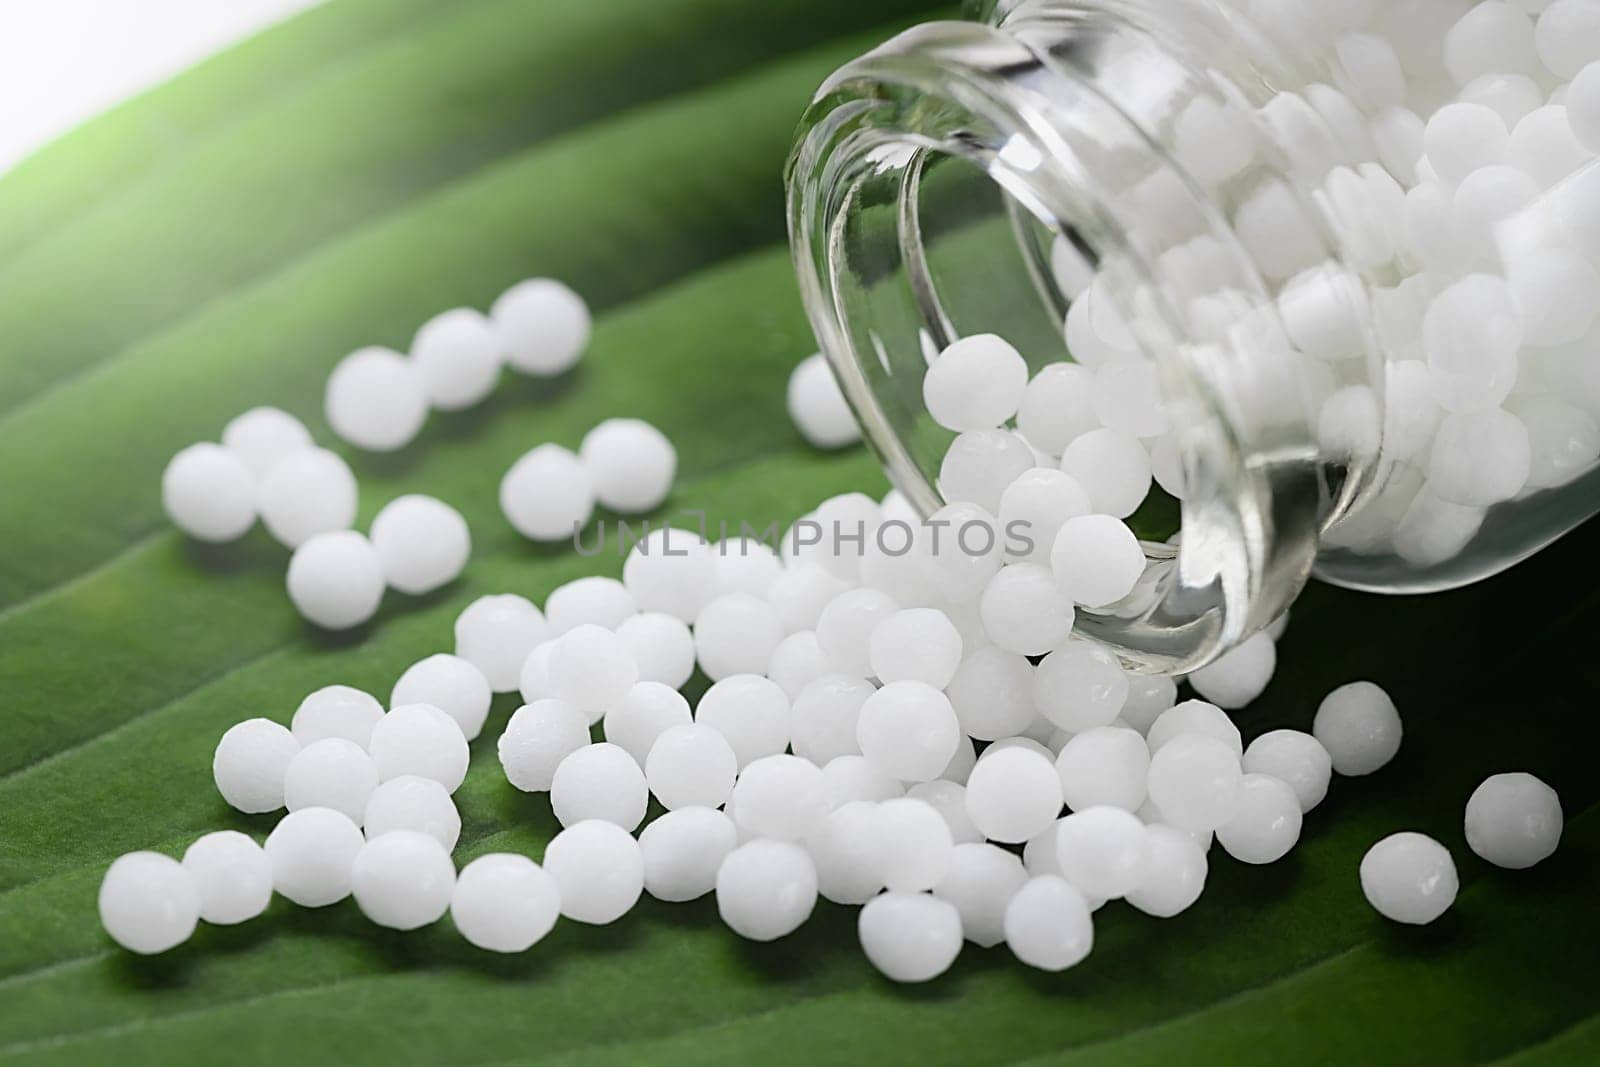 Homeopathic pills scattered from a bottle on a green leaf, closeup